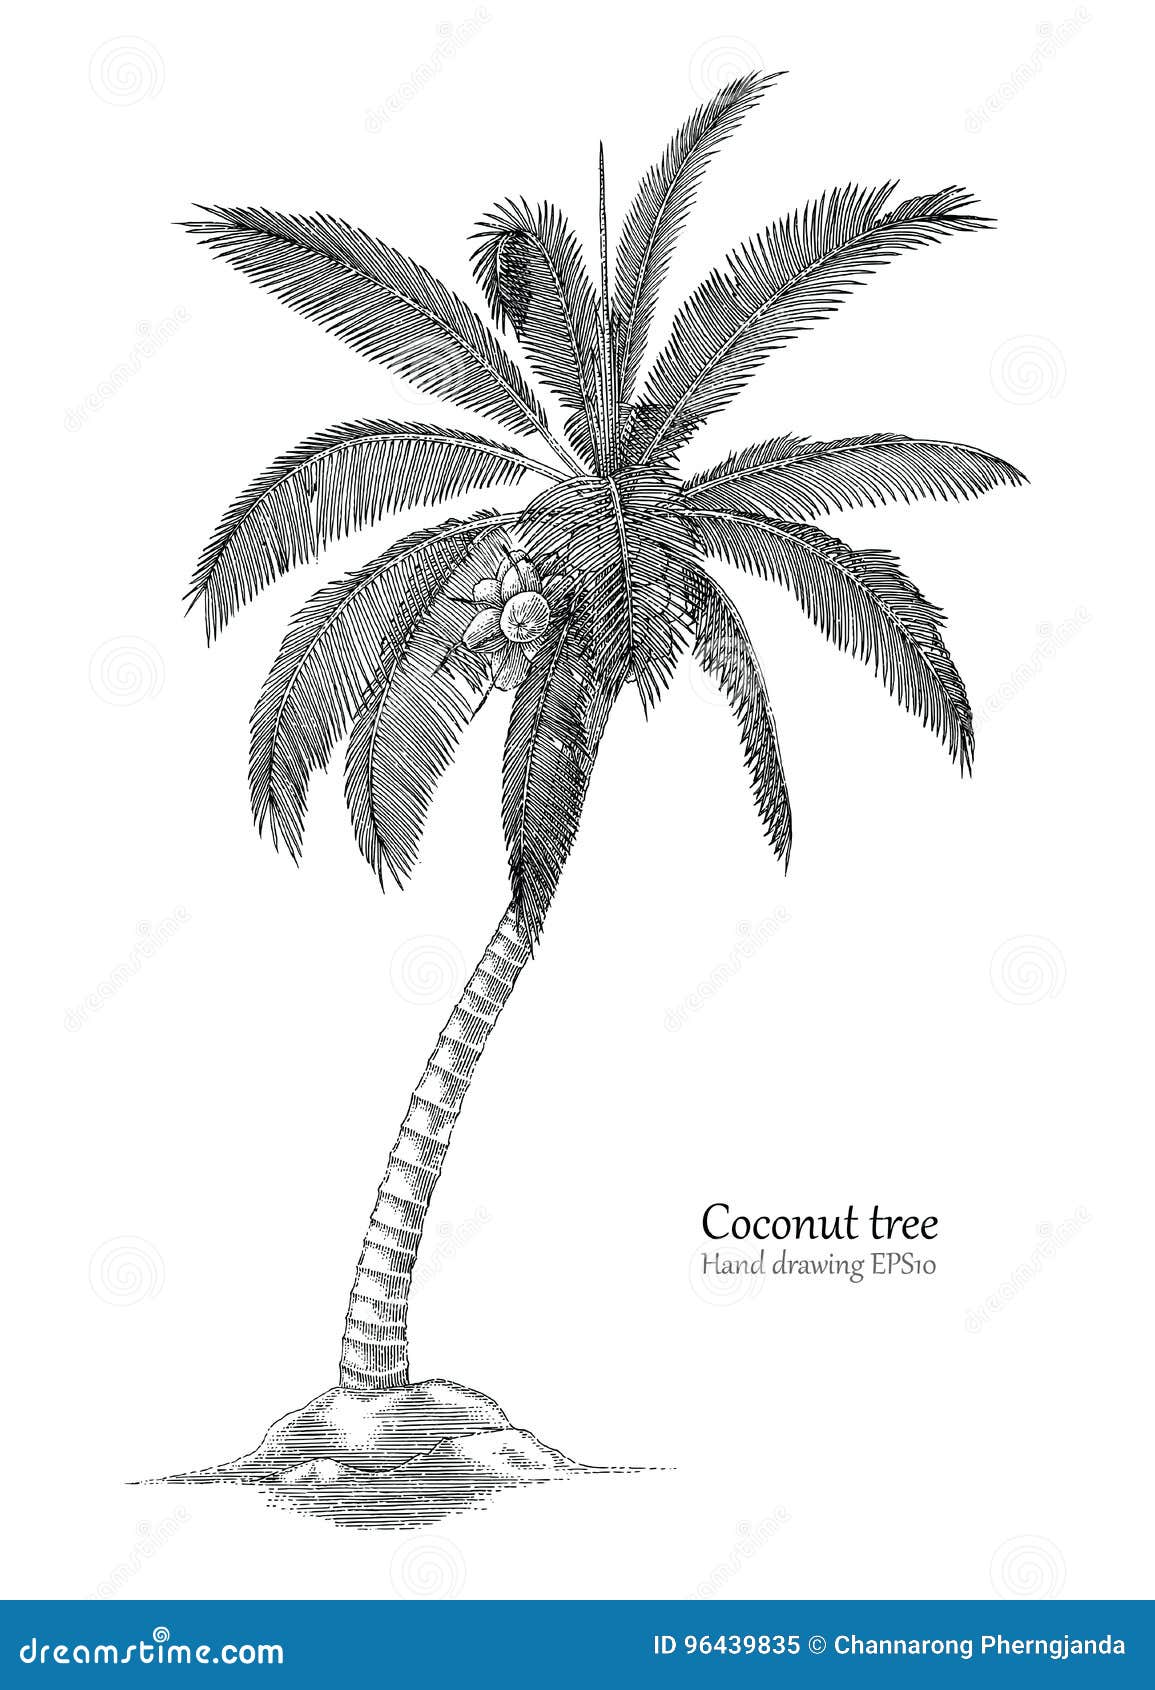 How to draw a coconut tree very easy | SIMPLE DRAWING - YouTube-saigonsouth.com.vn